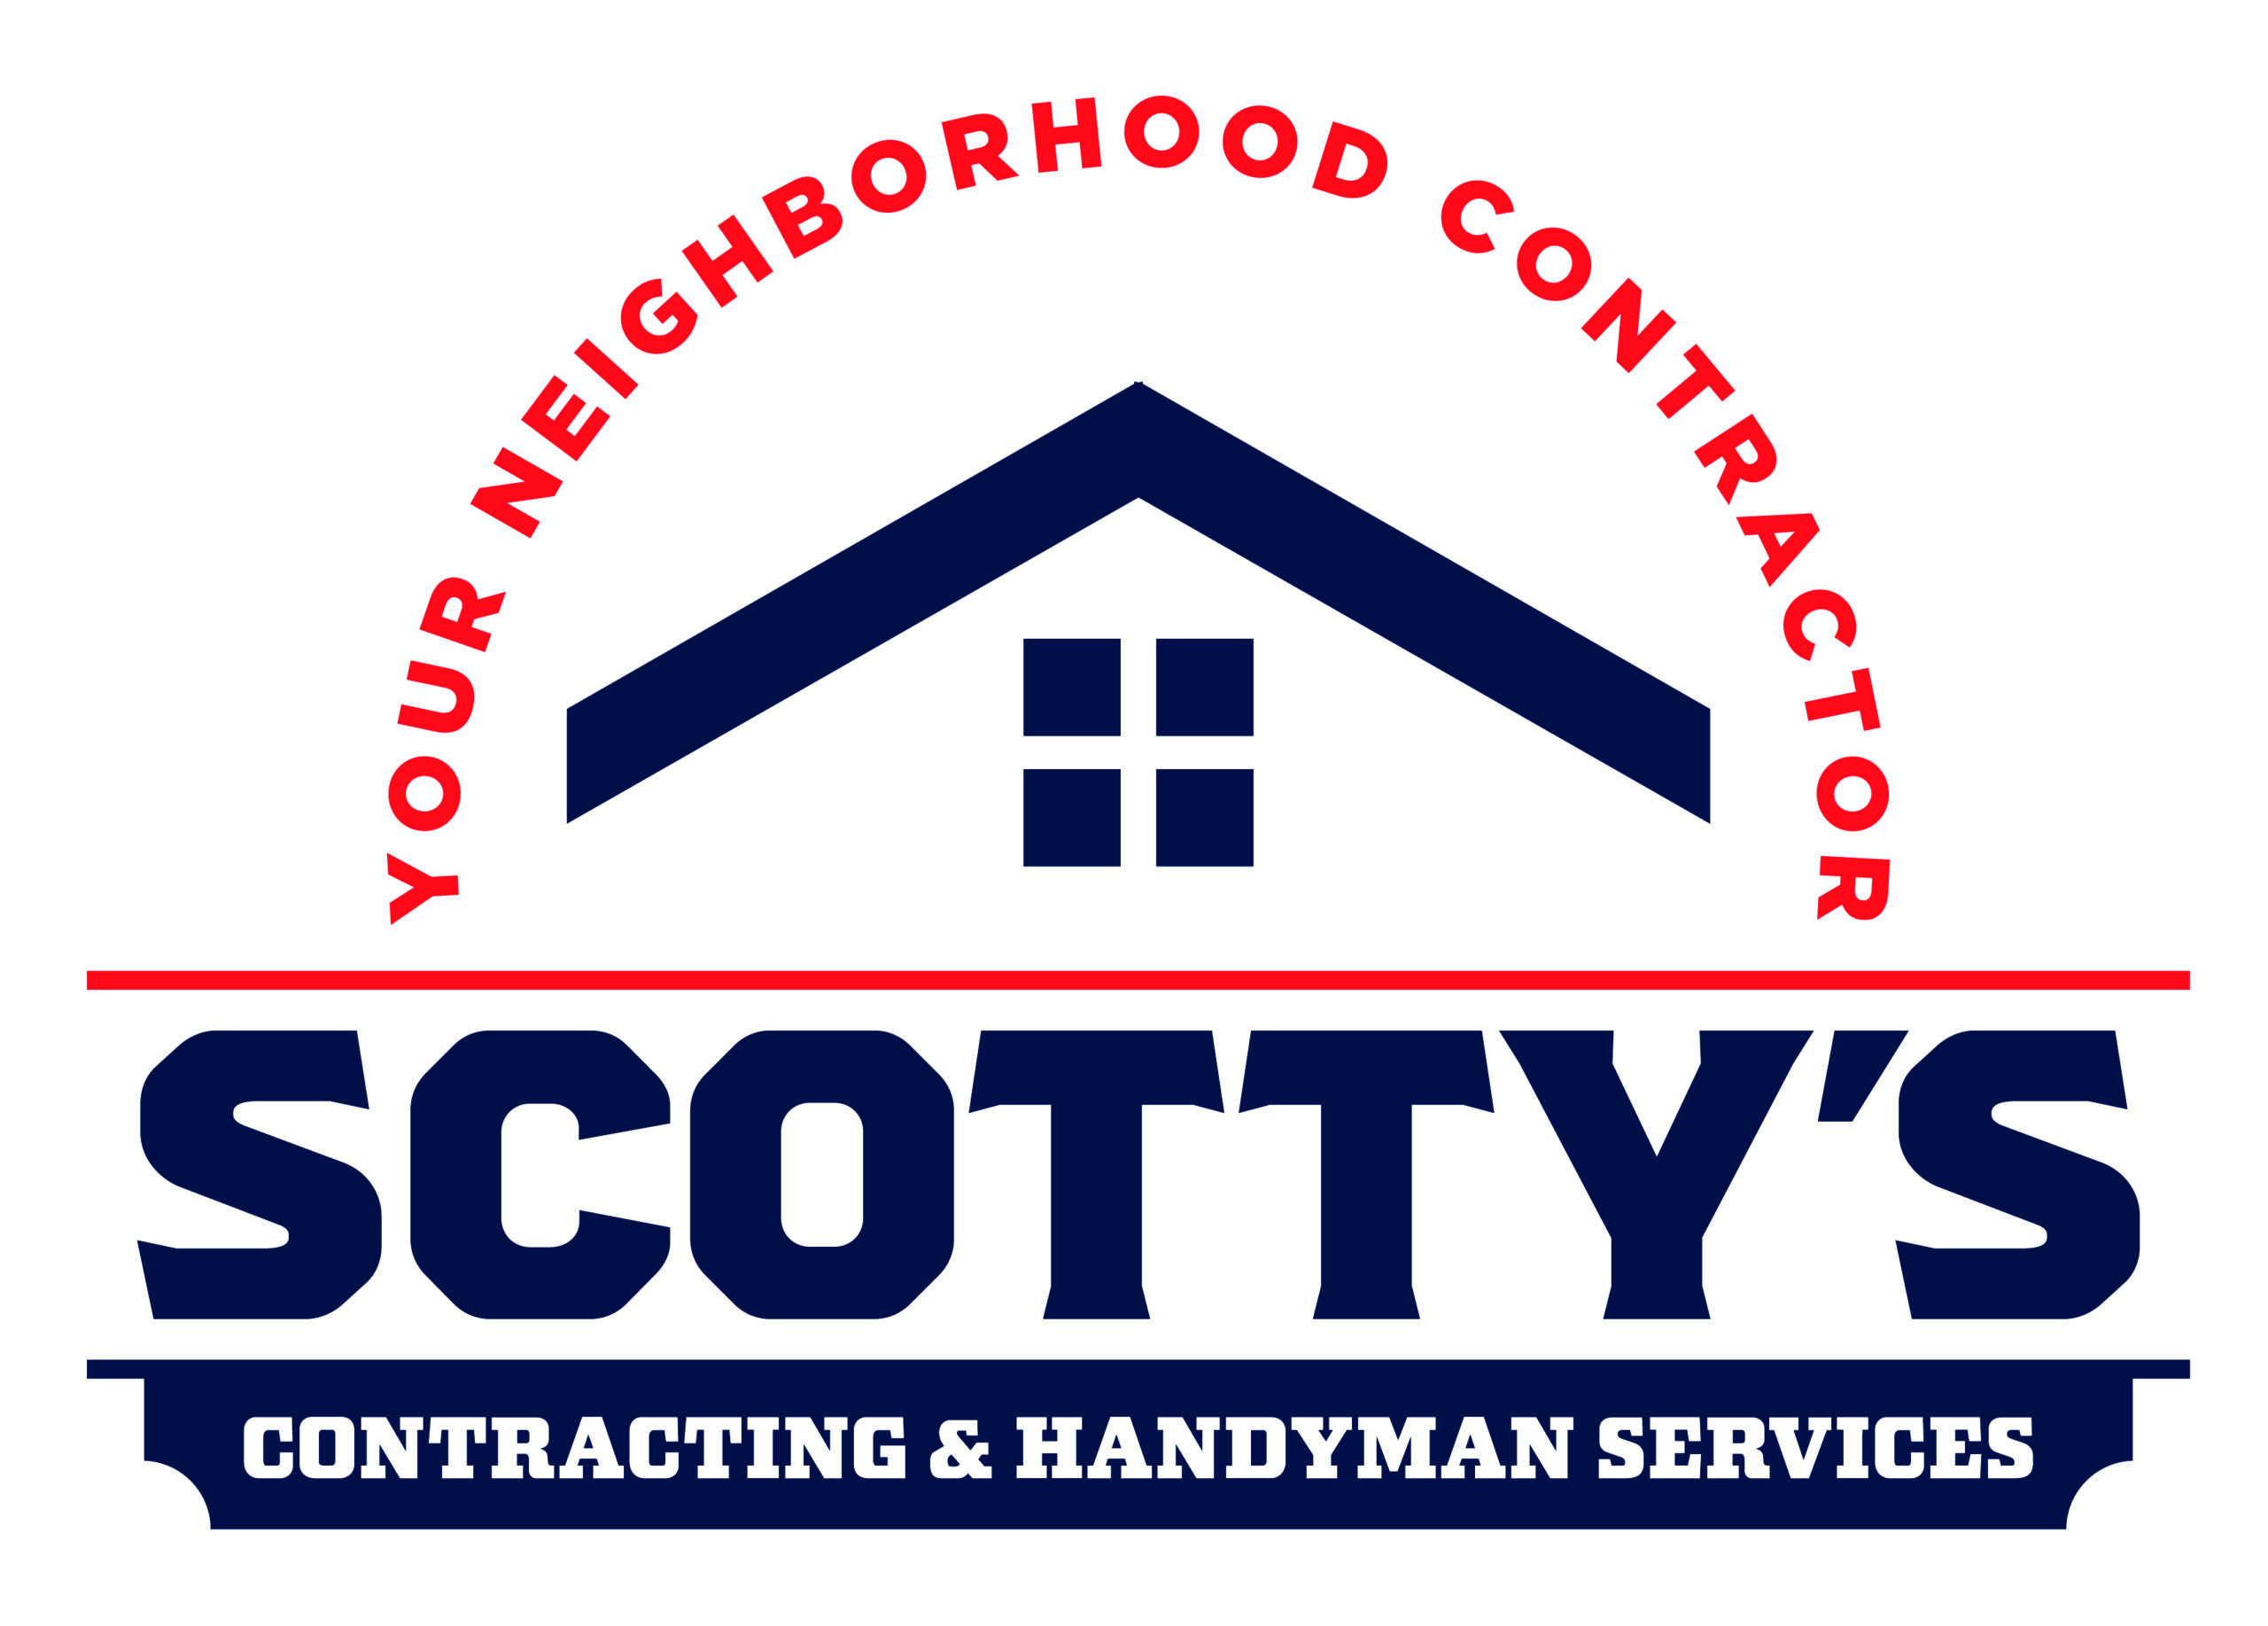 Scotty's Contracting & Handymand Services